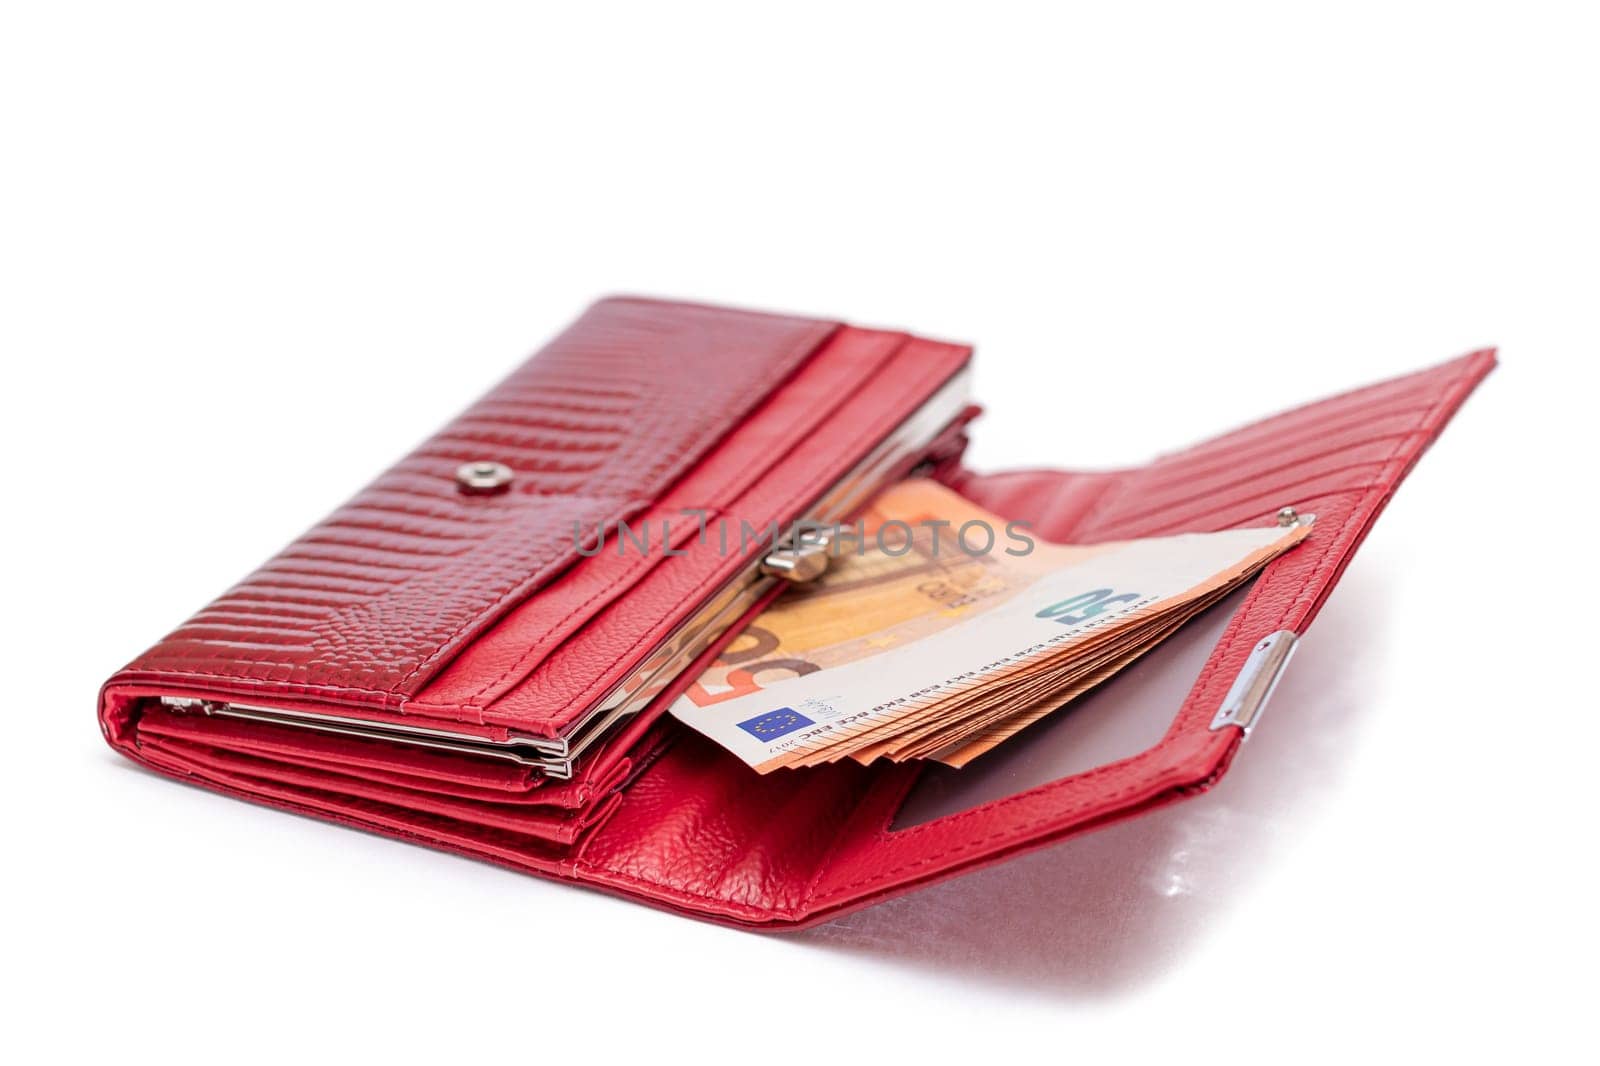 Opened Red Women Purse with 50 Euro Banknotes Inside - Isolated on White Background. A Wallet Full of Money Symbolizing Wealth, Success, Shopping and Social Status - Isolation